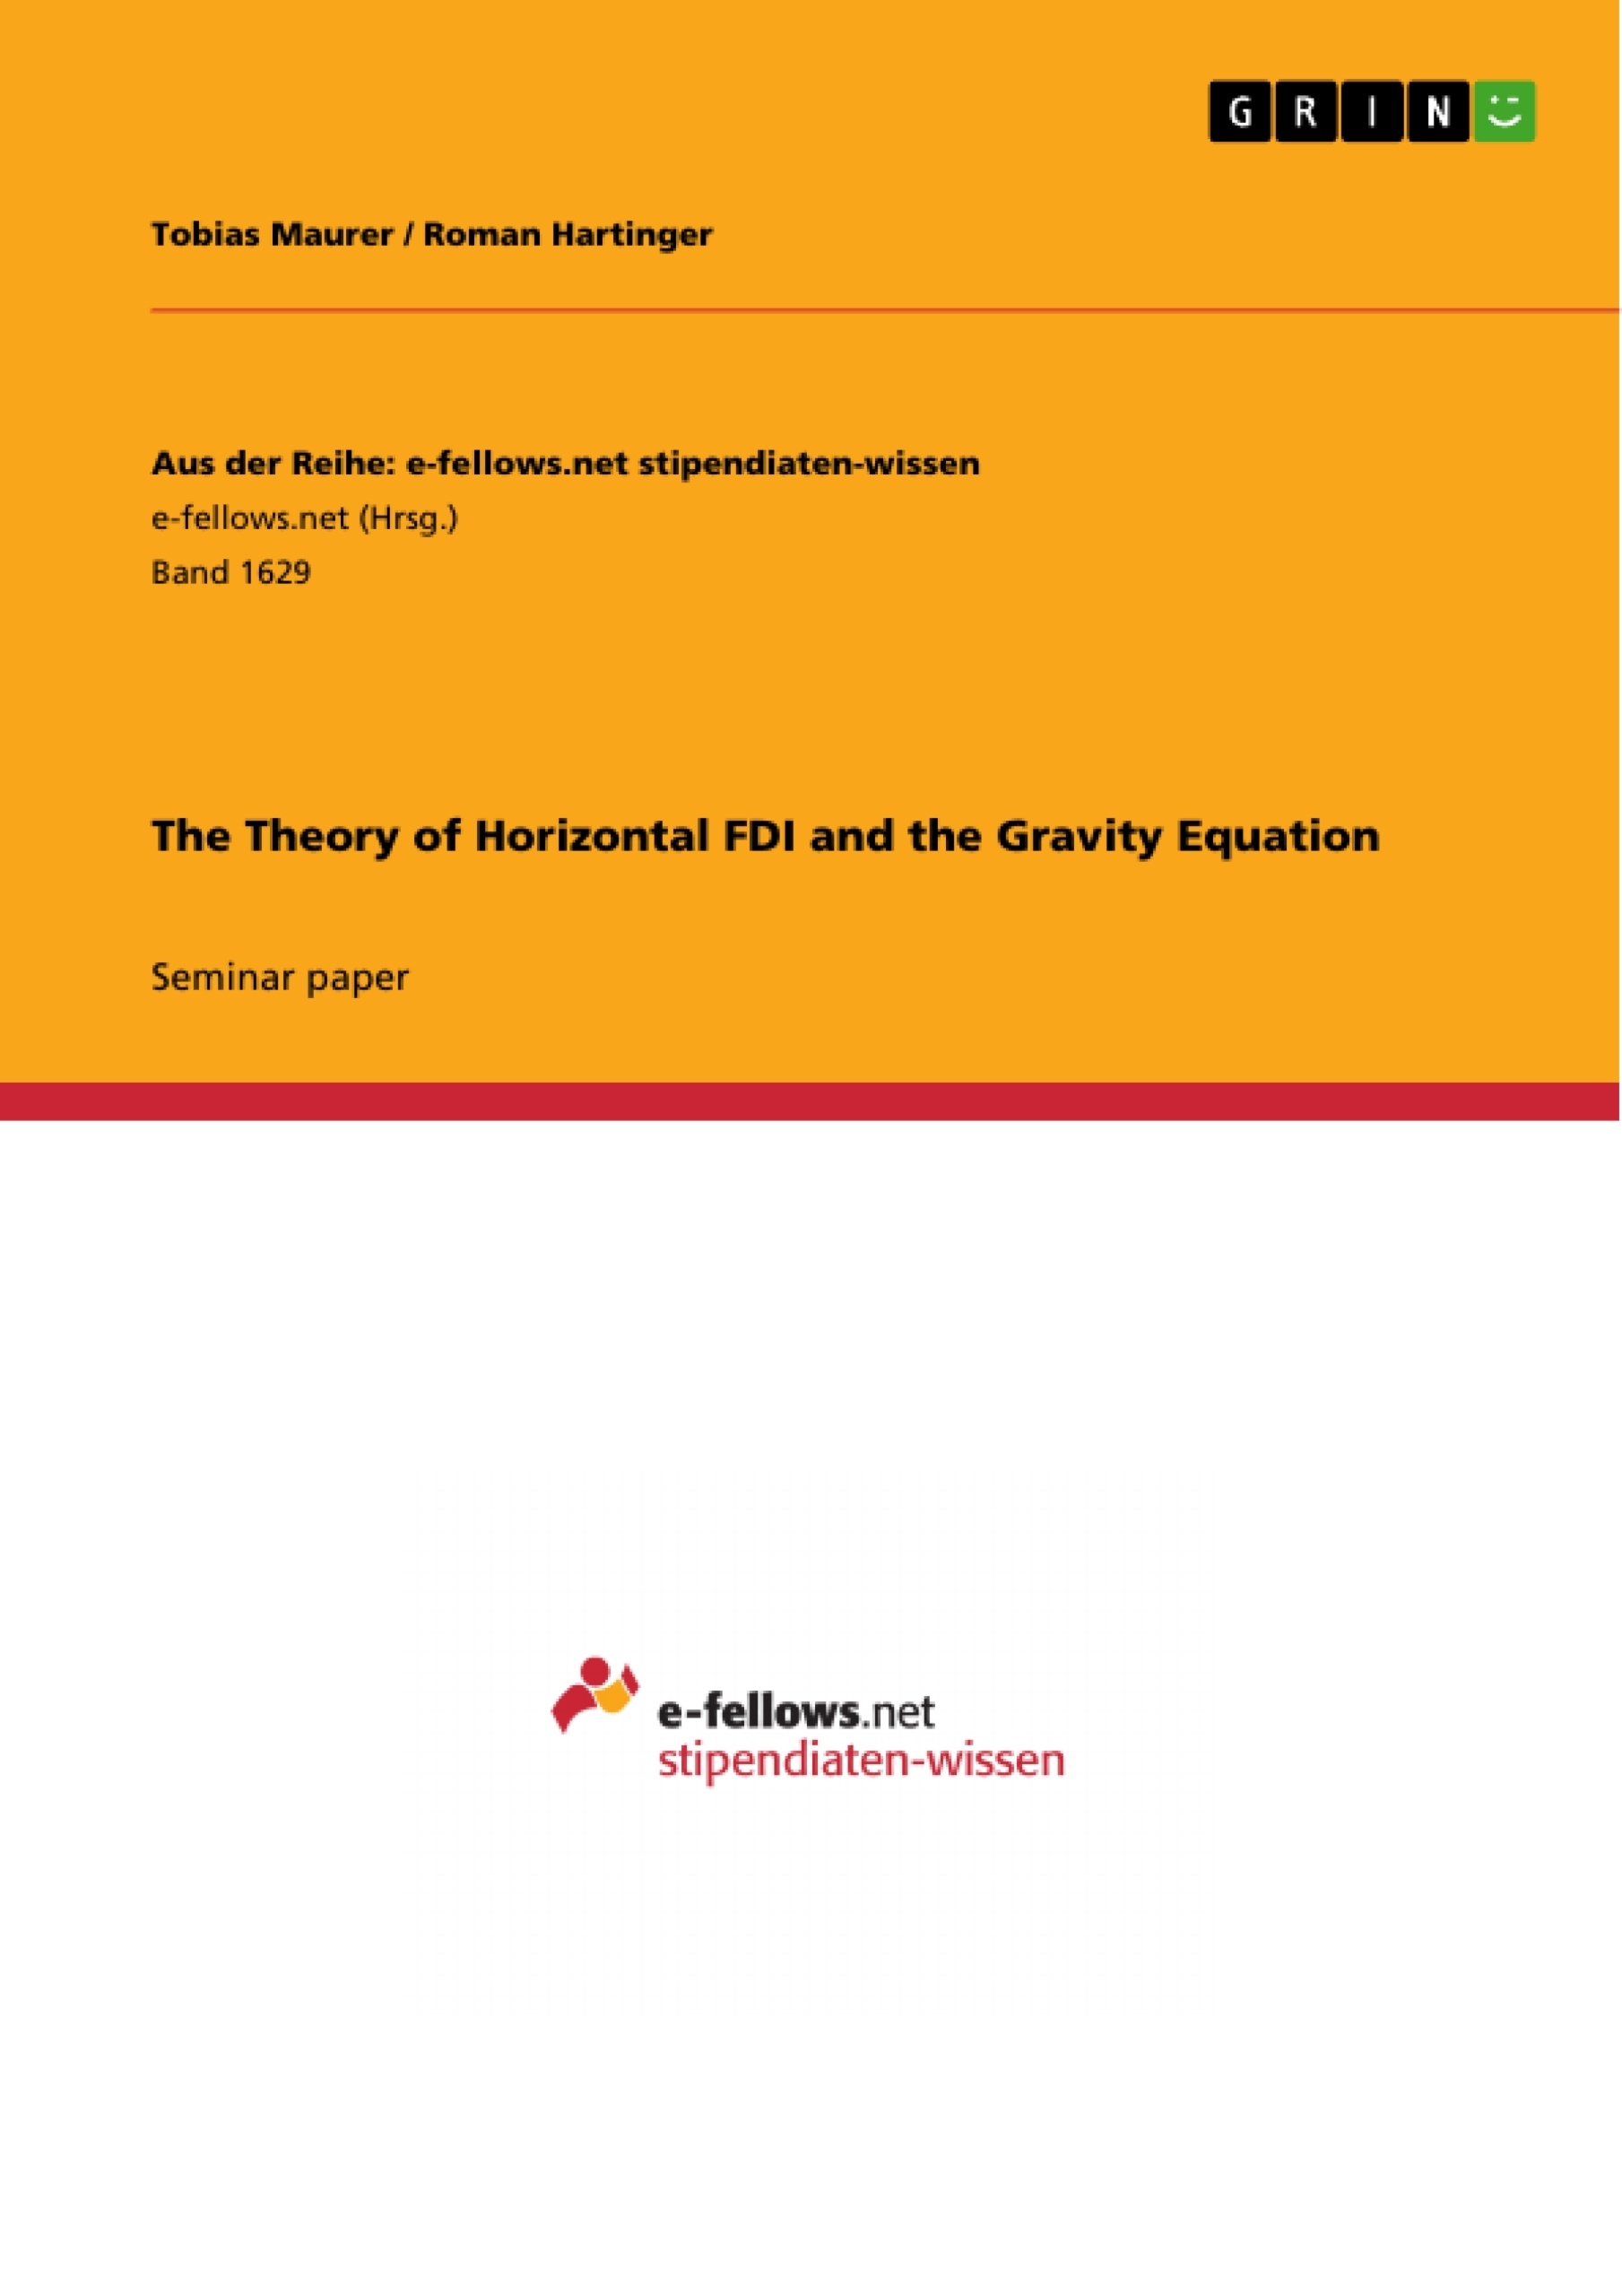 Titre: The Theory of Horizontal FDI and the Gravity Equation